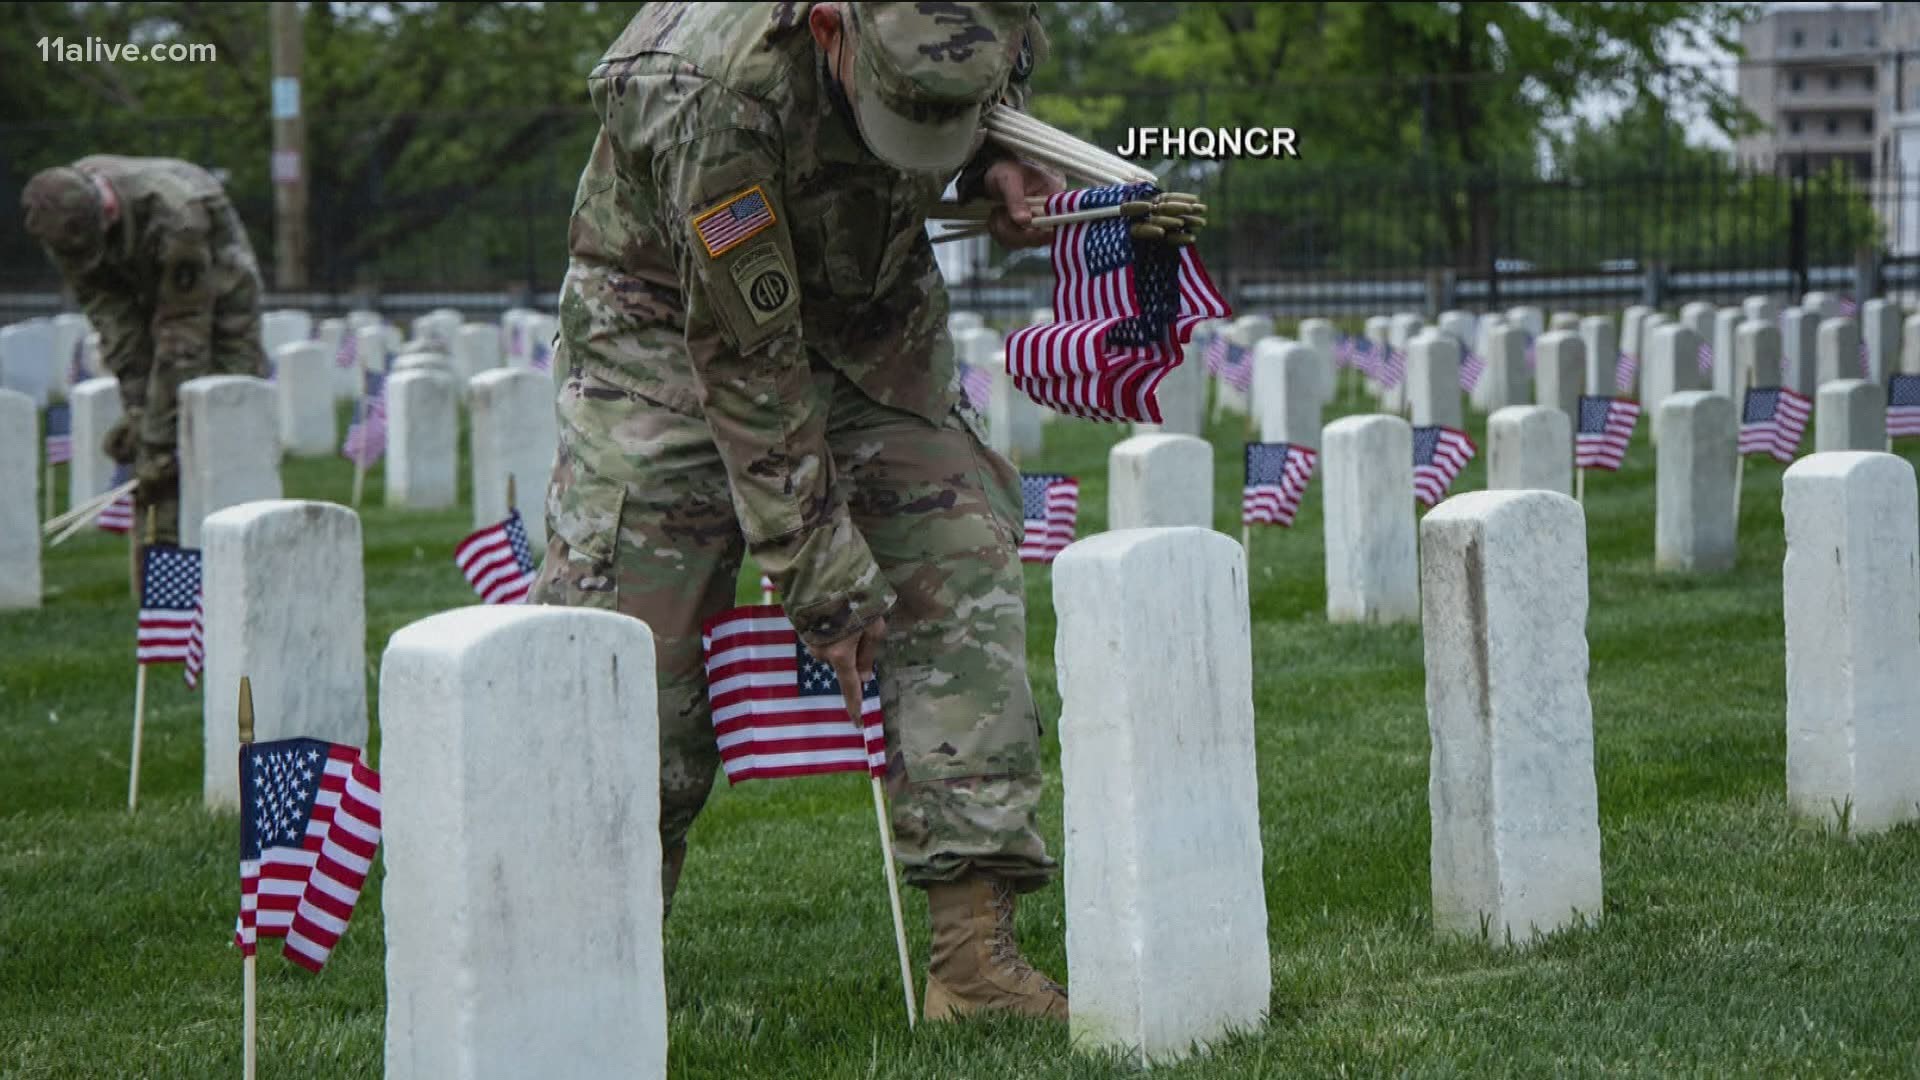 Though there will be changes this year to Memorial Day remembrances, some traditions continue.